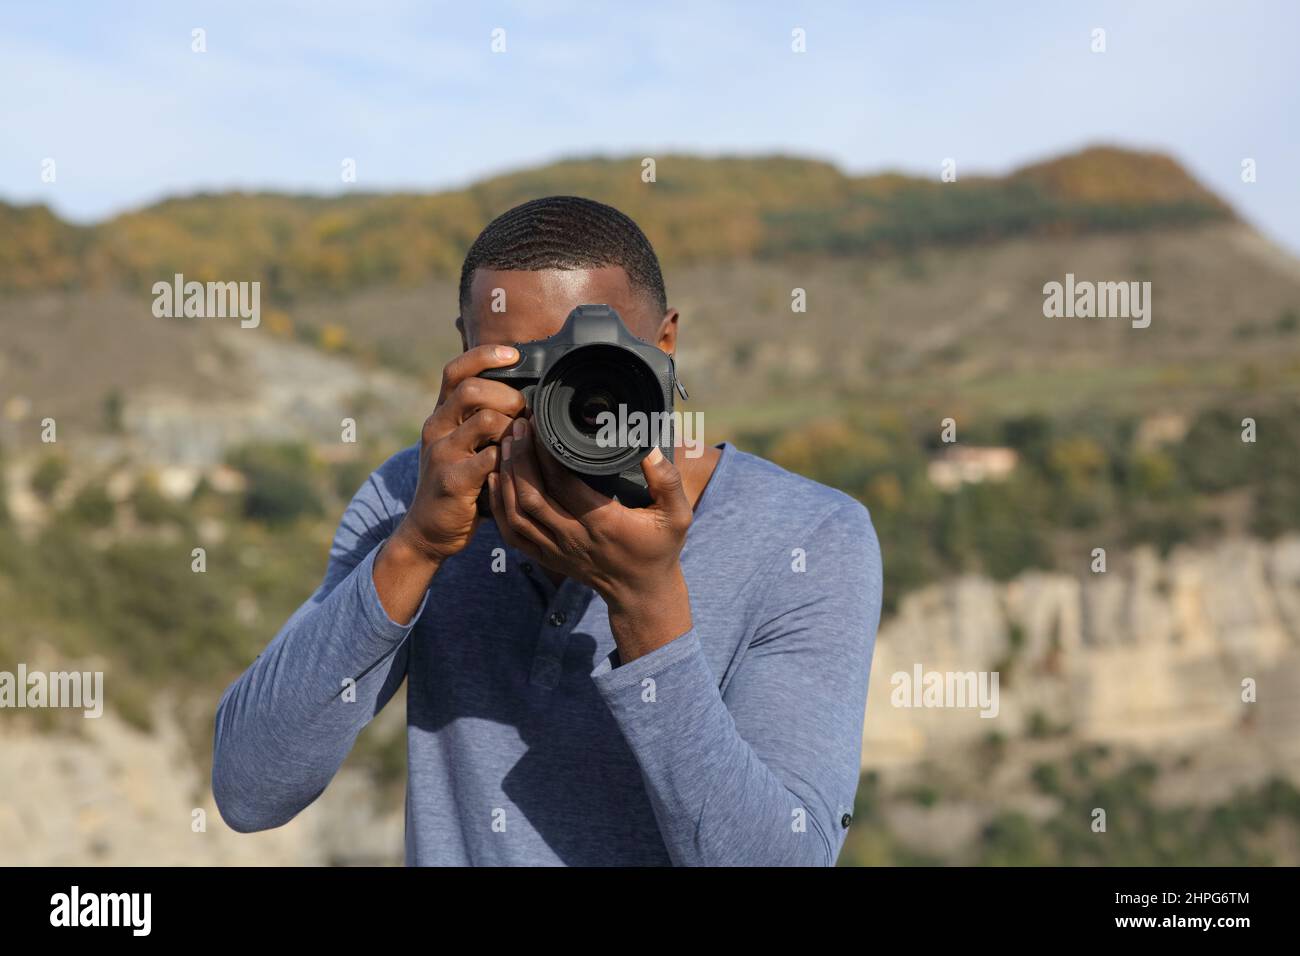 Front view portrait of a man with black skin taking photos with dslr camera in nature Stock Photo